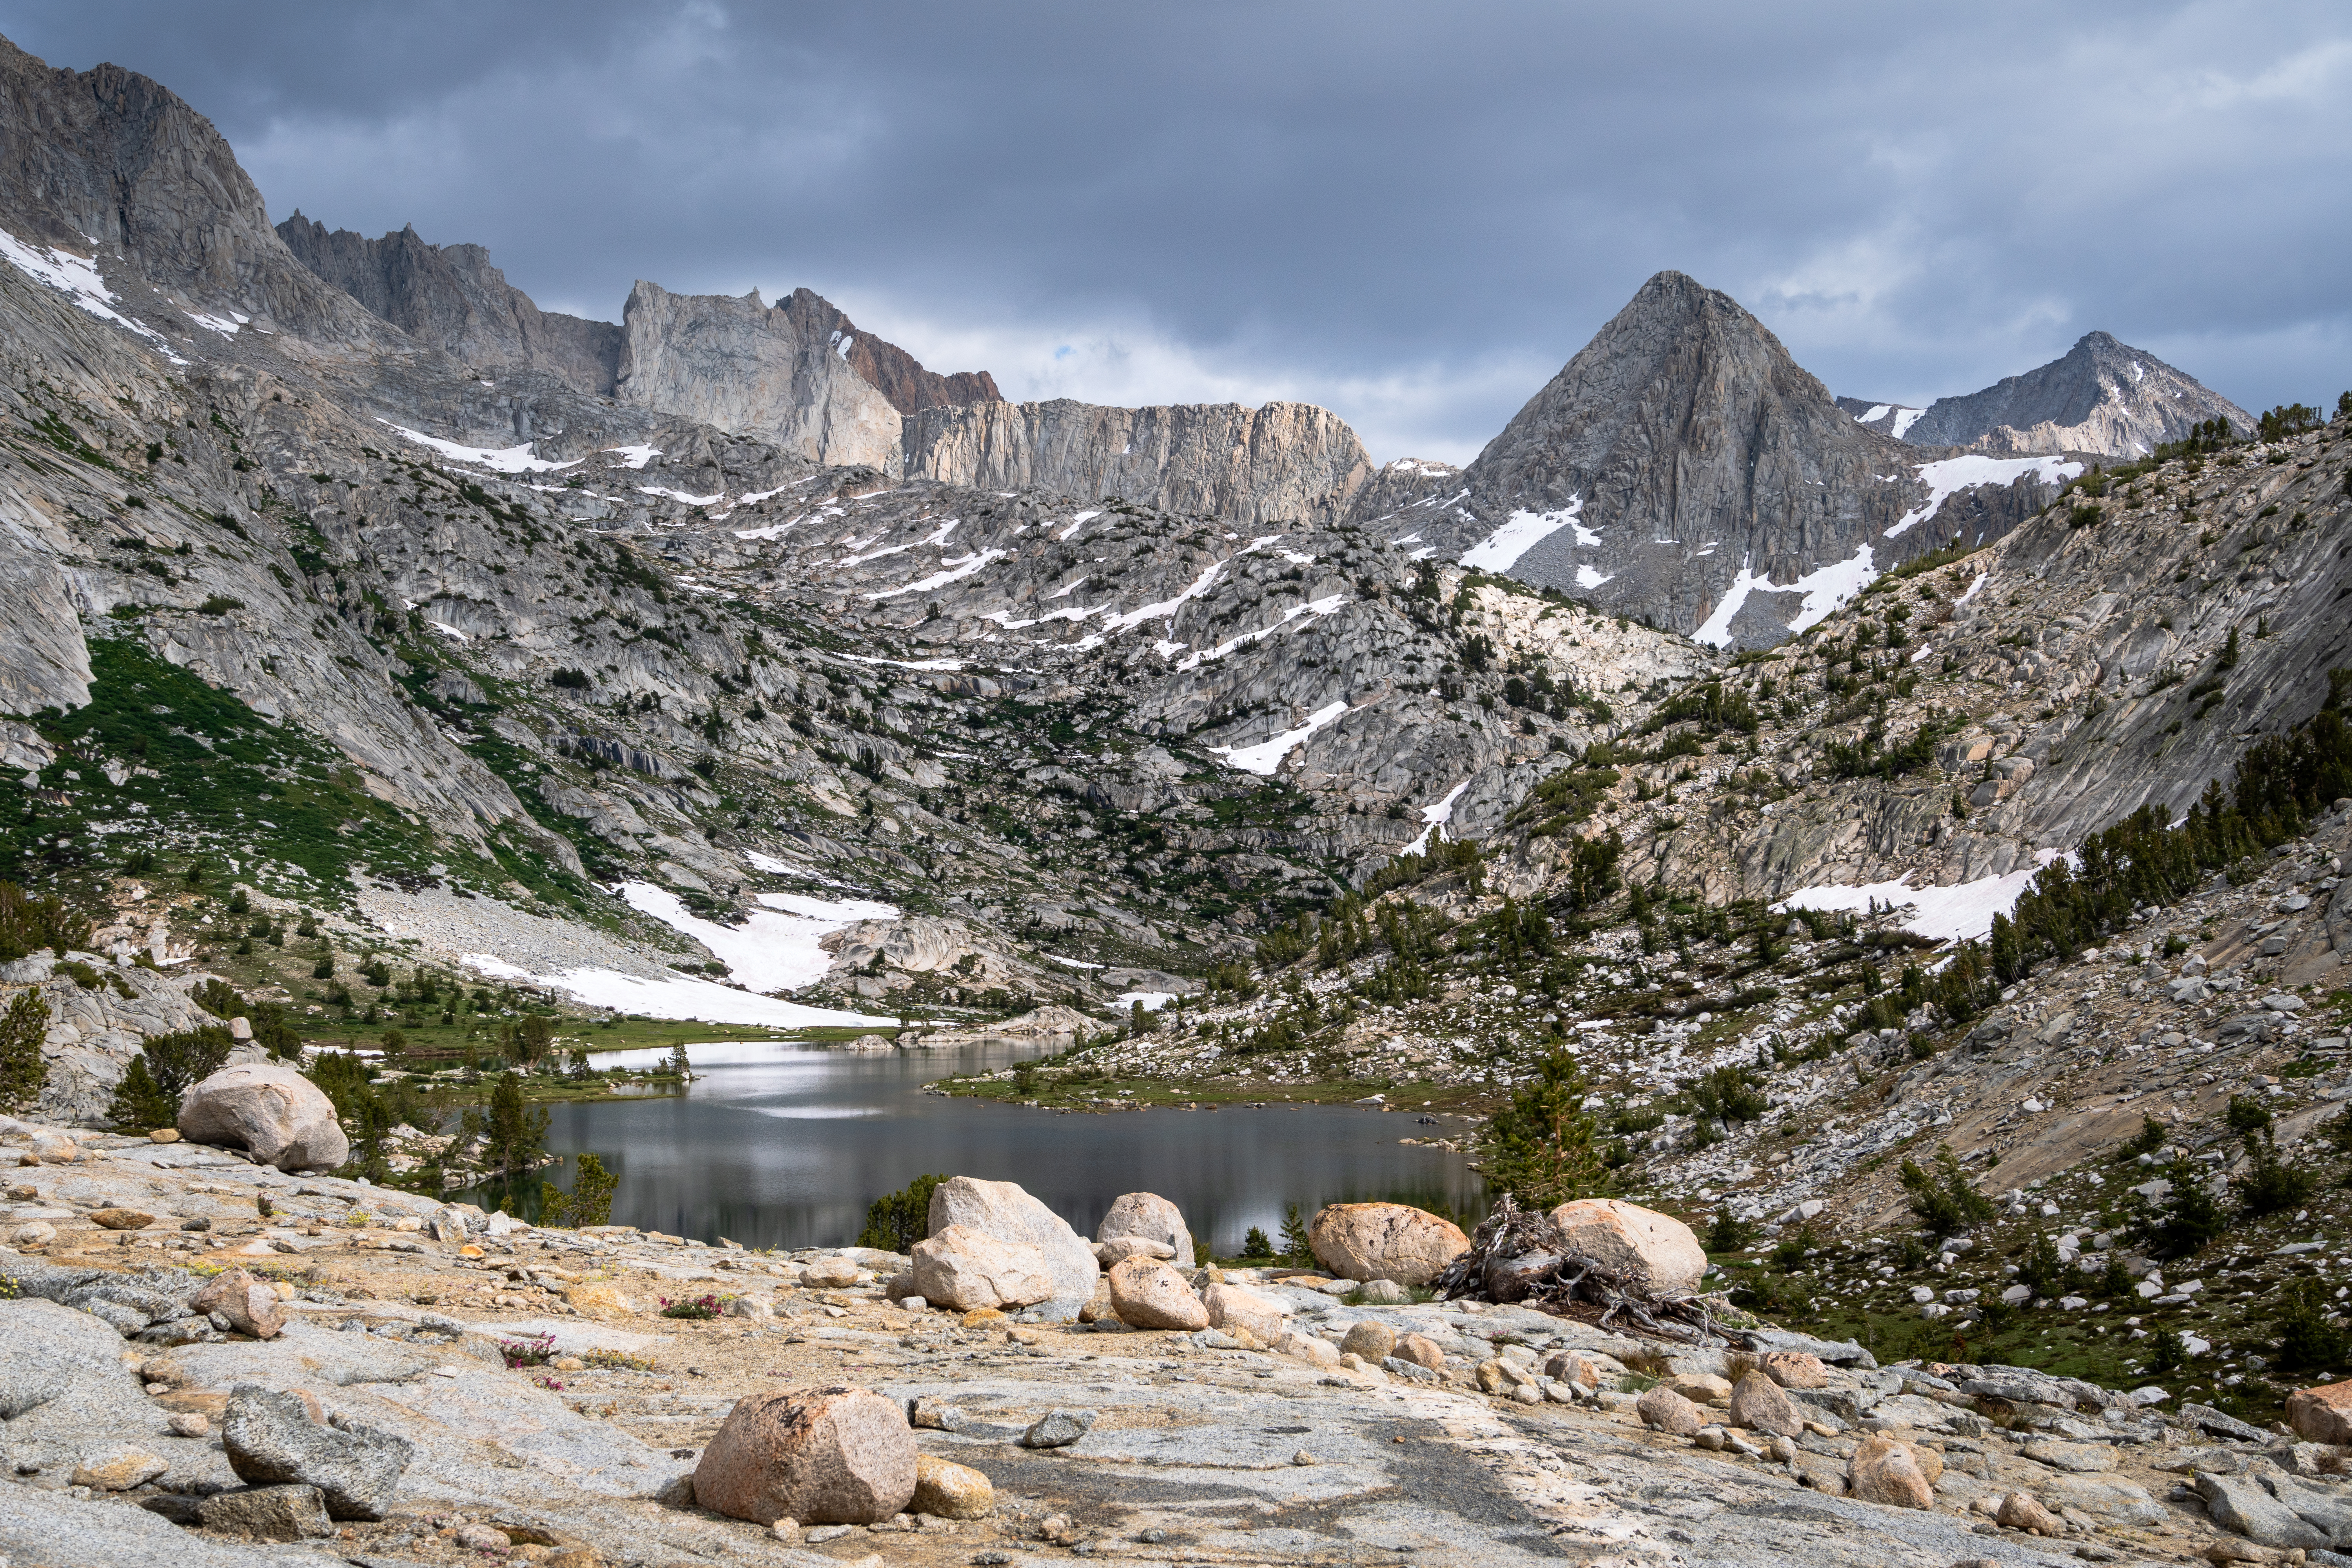 Granite cliffs above Evolution Lake in Kings Canyon National Park